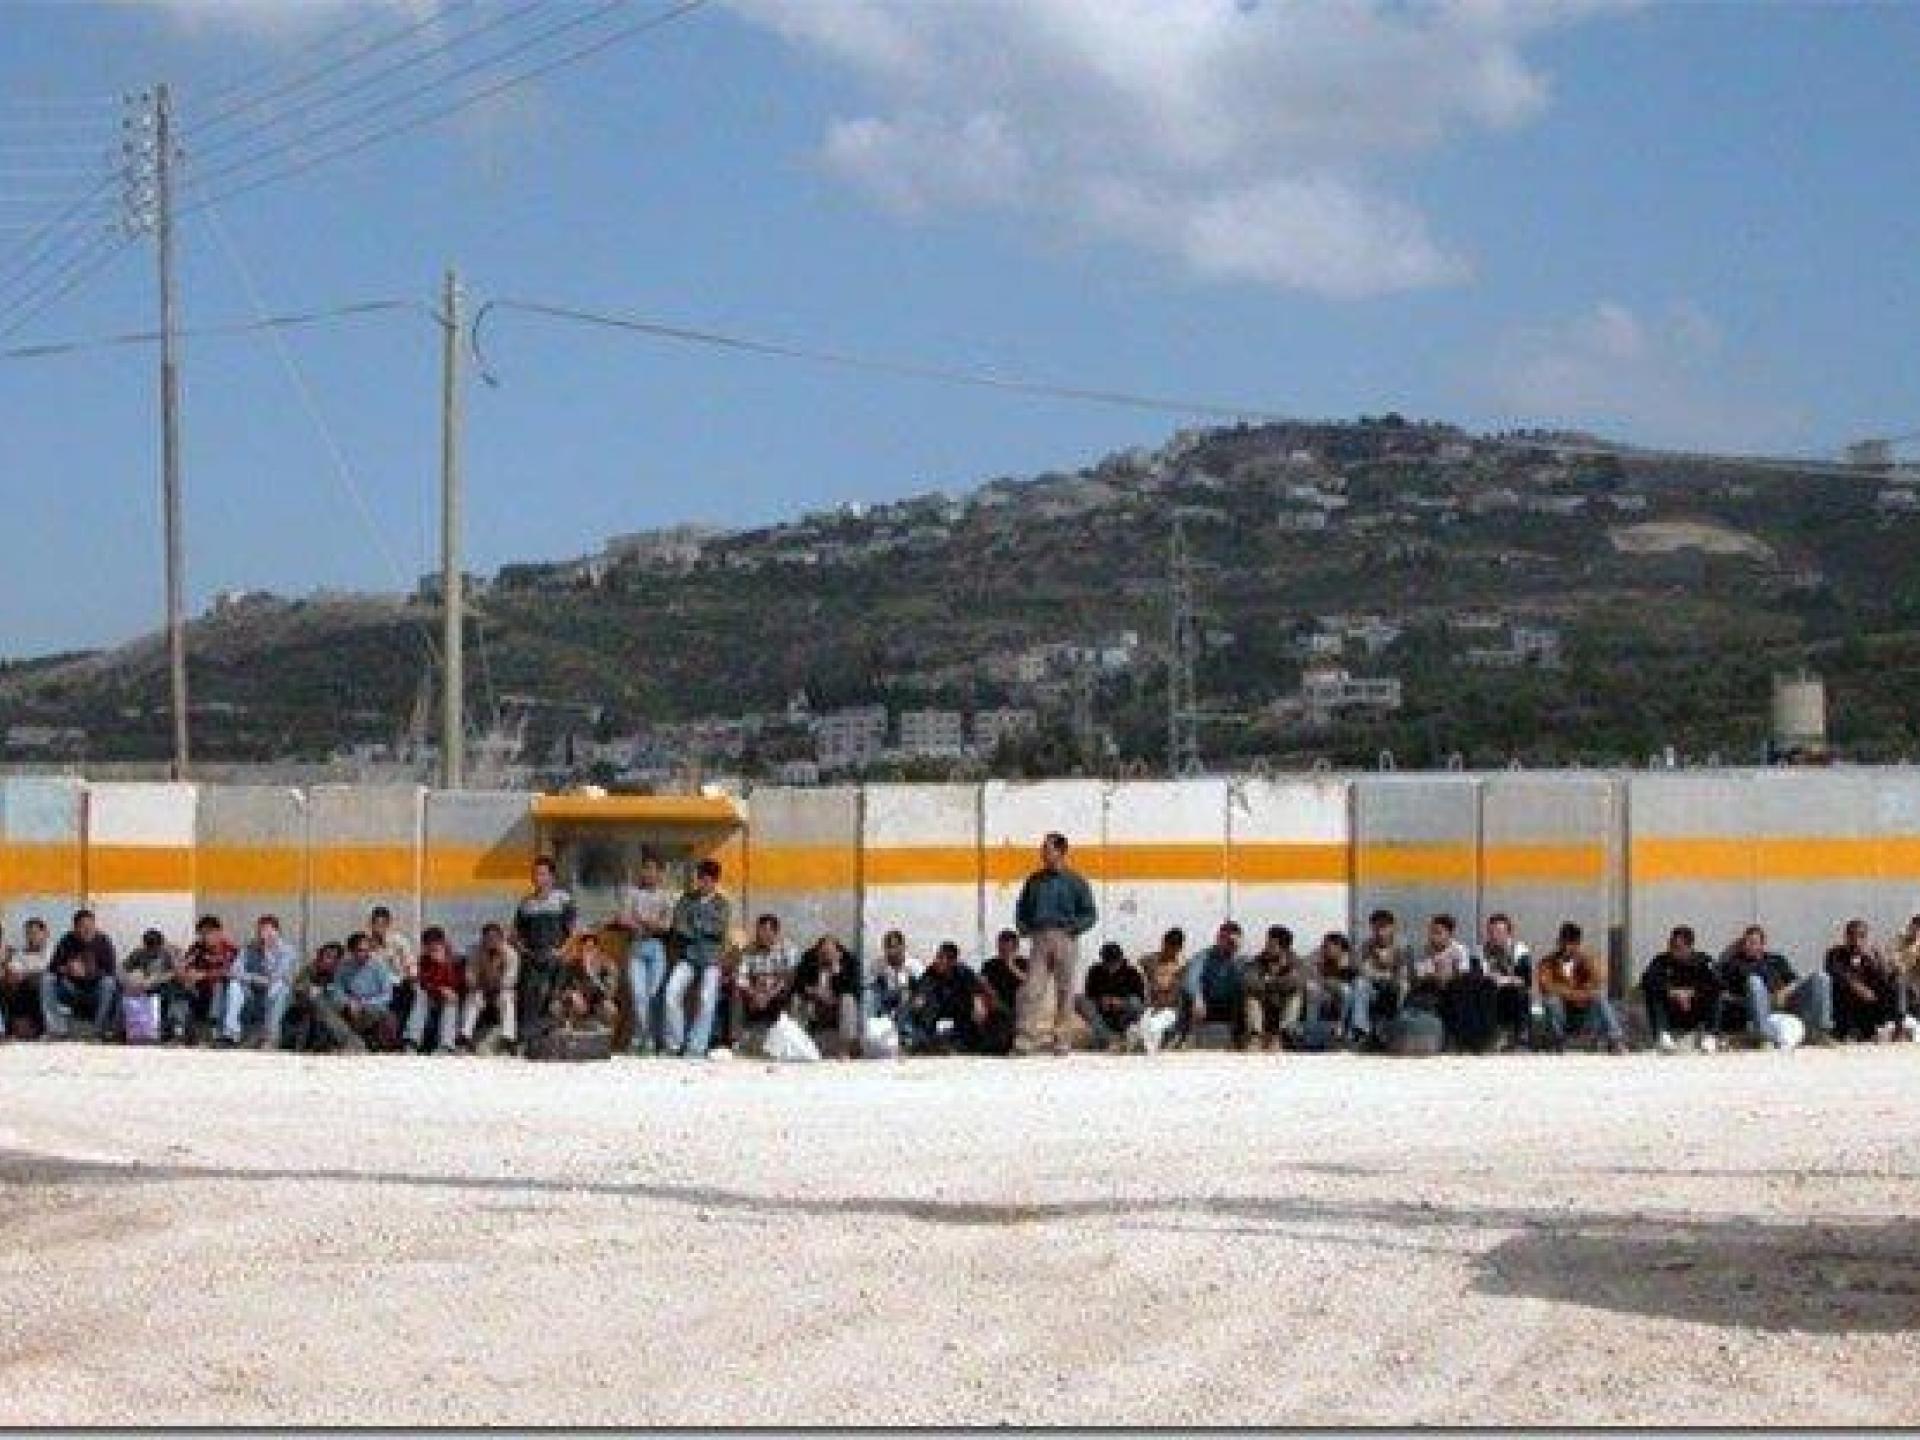 Beit-Iba checkpoint 22.04.04